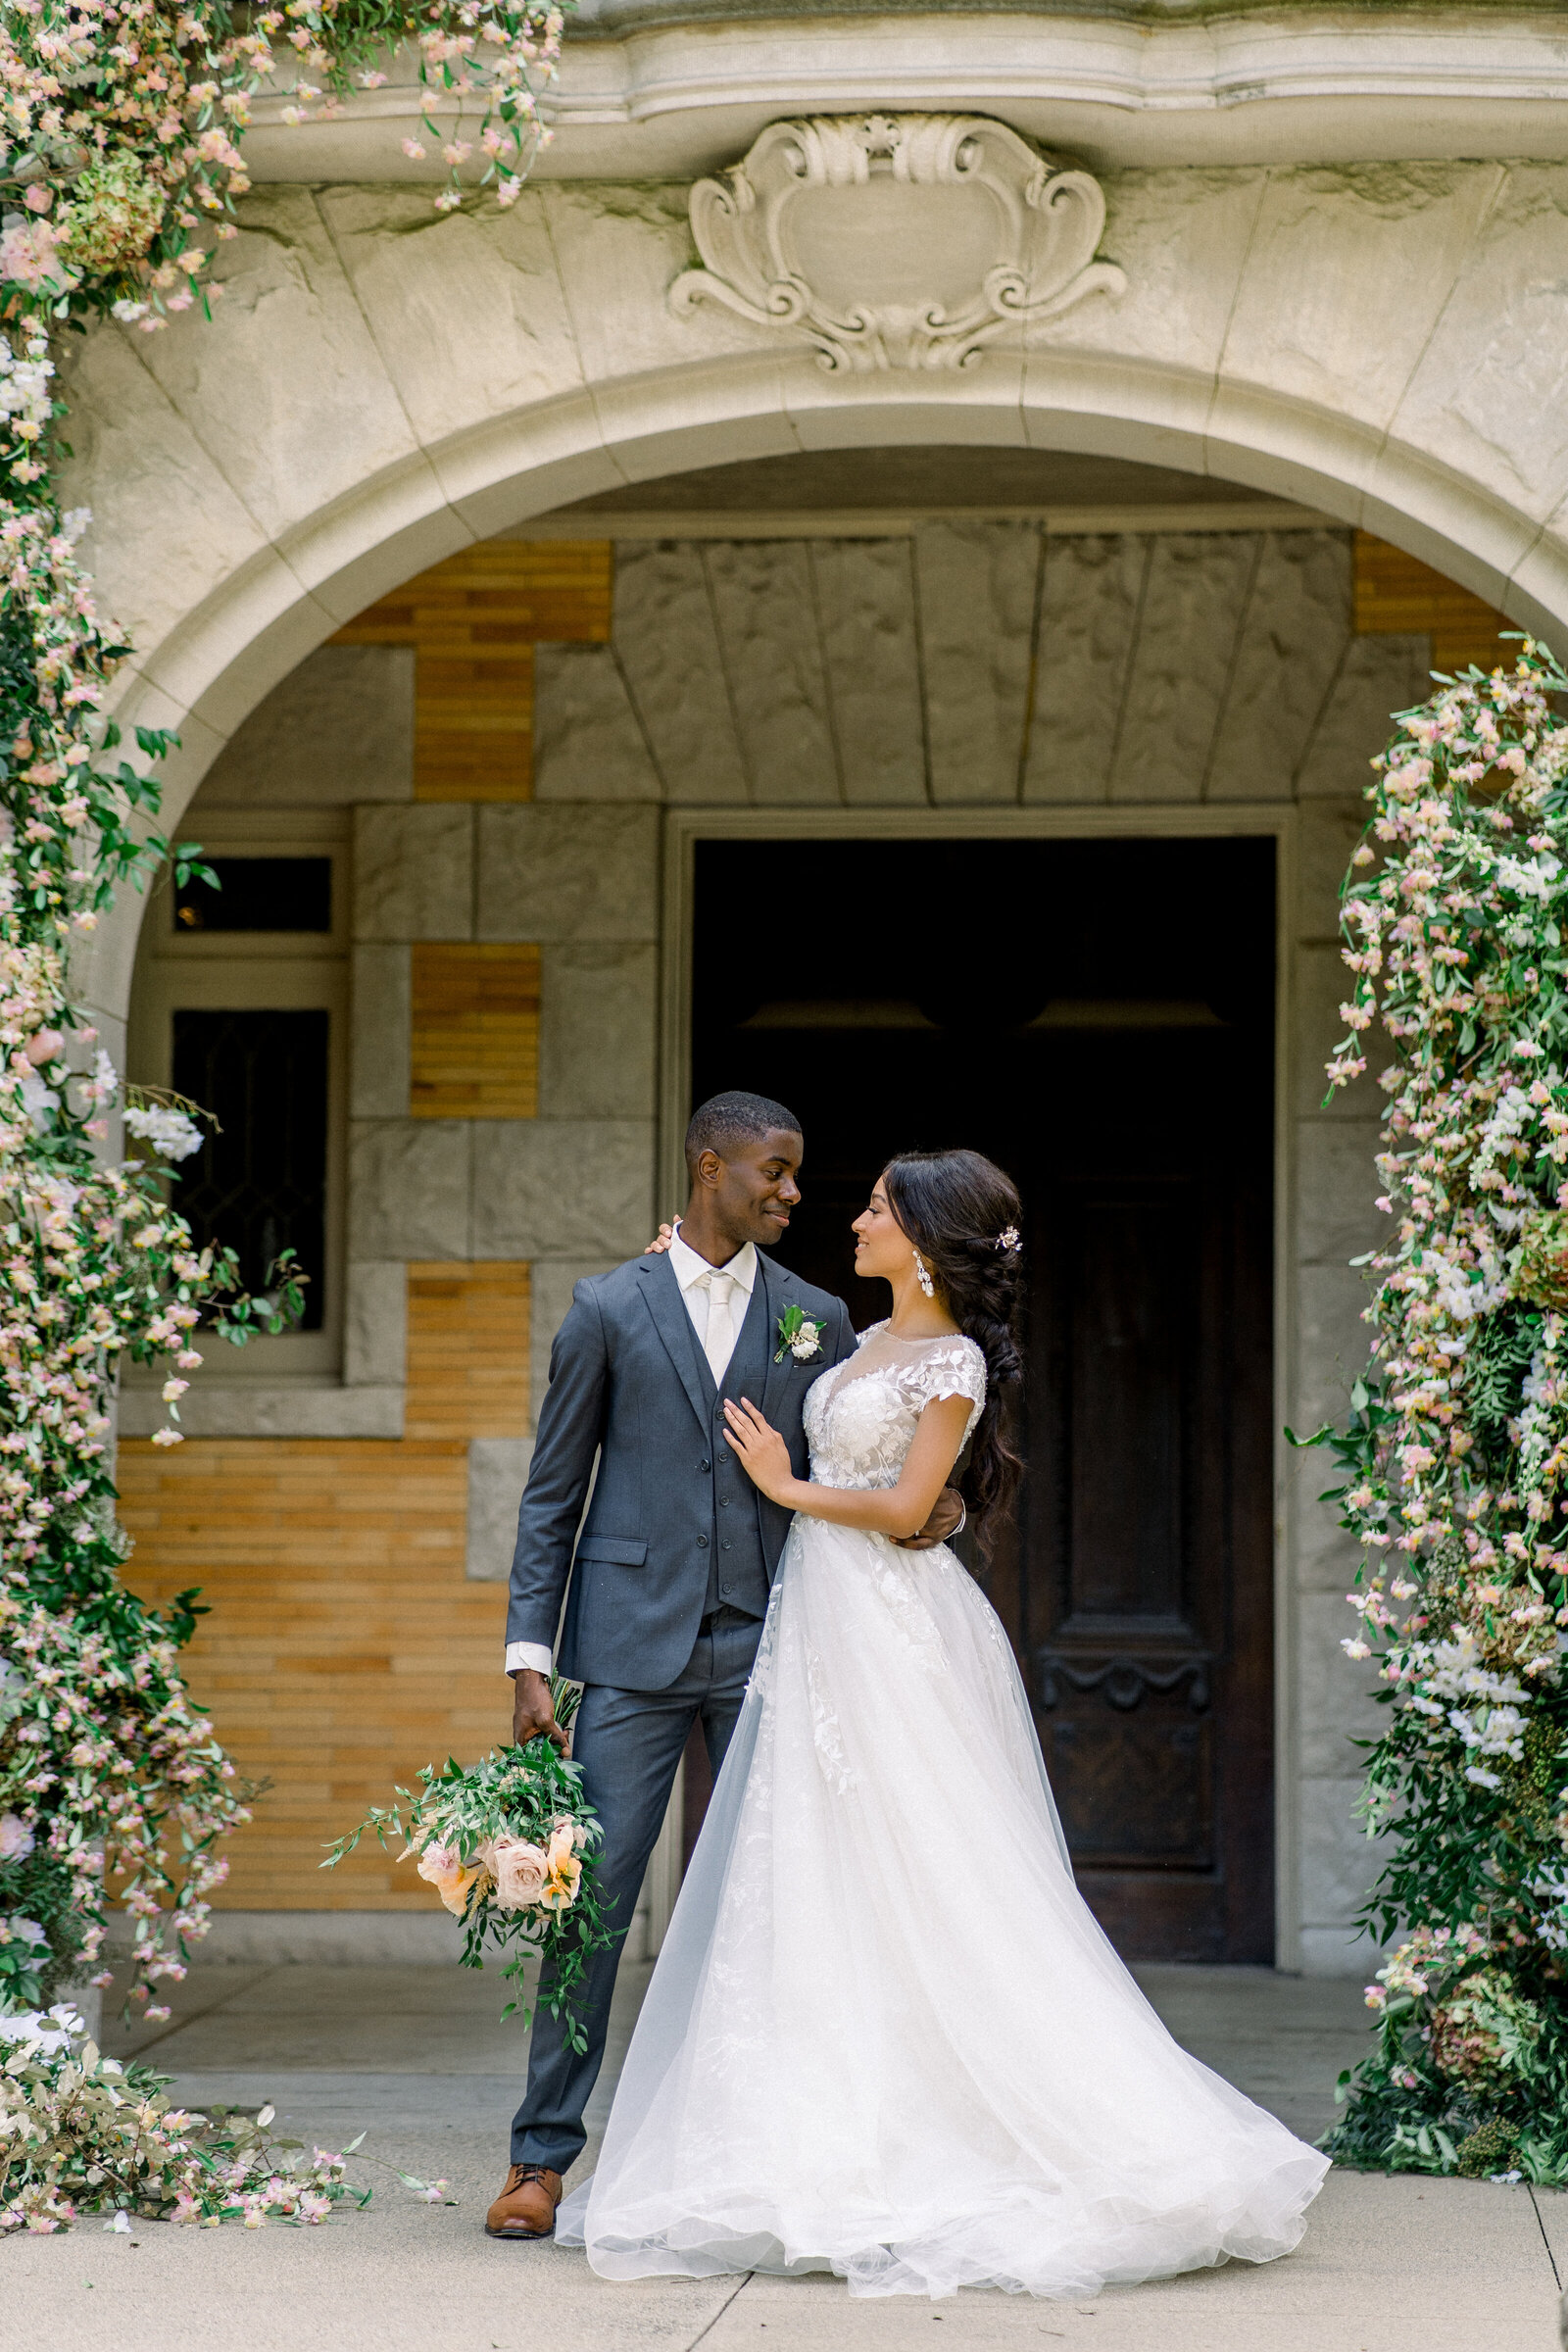 Bride and groom during wedding at Filoli in Woodside, CA